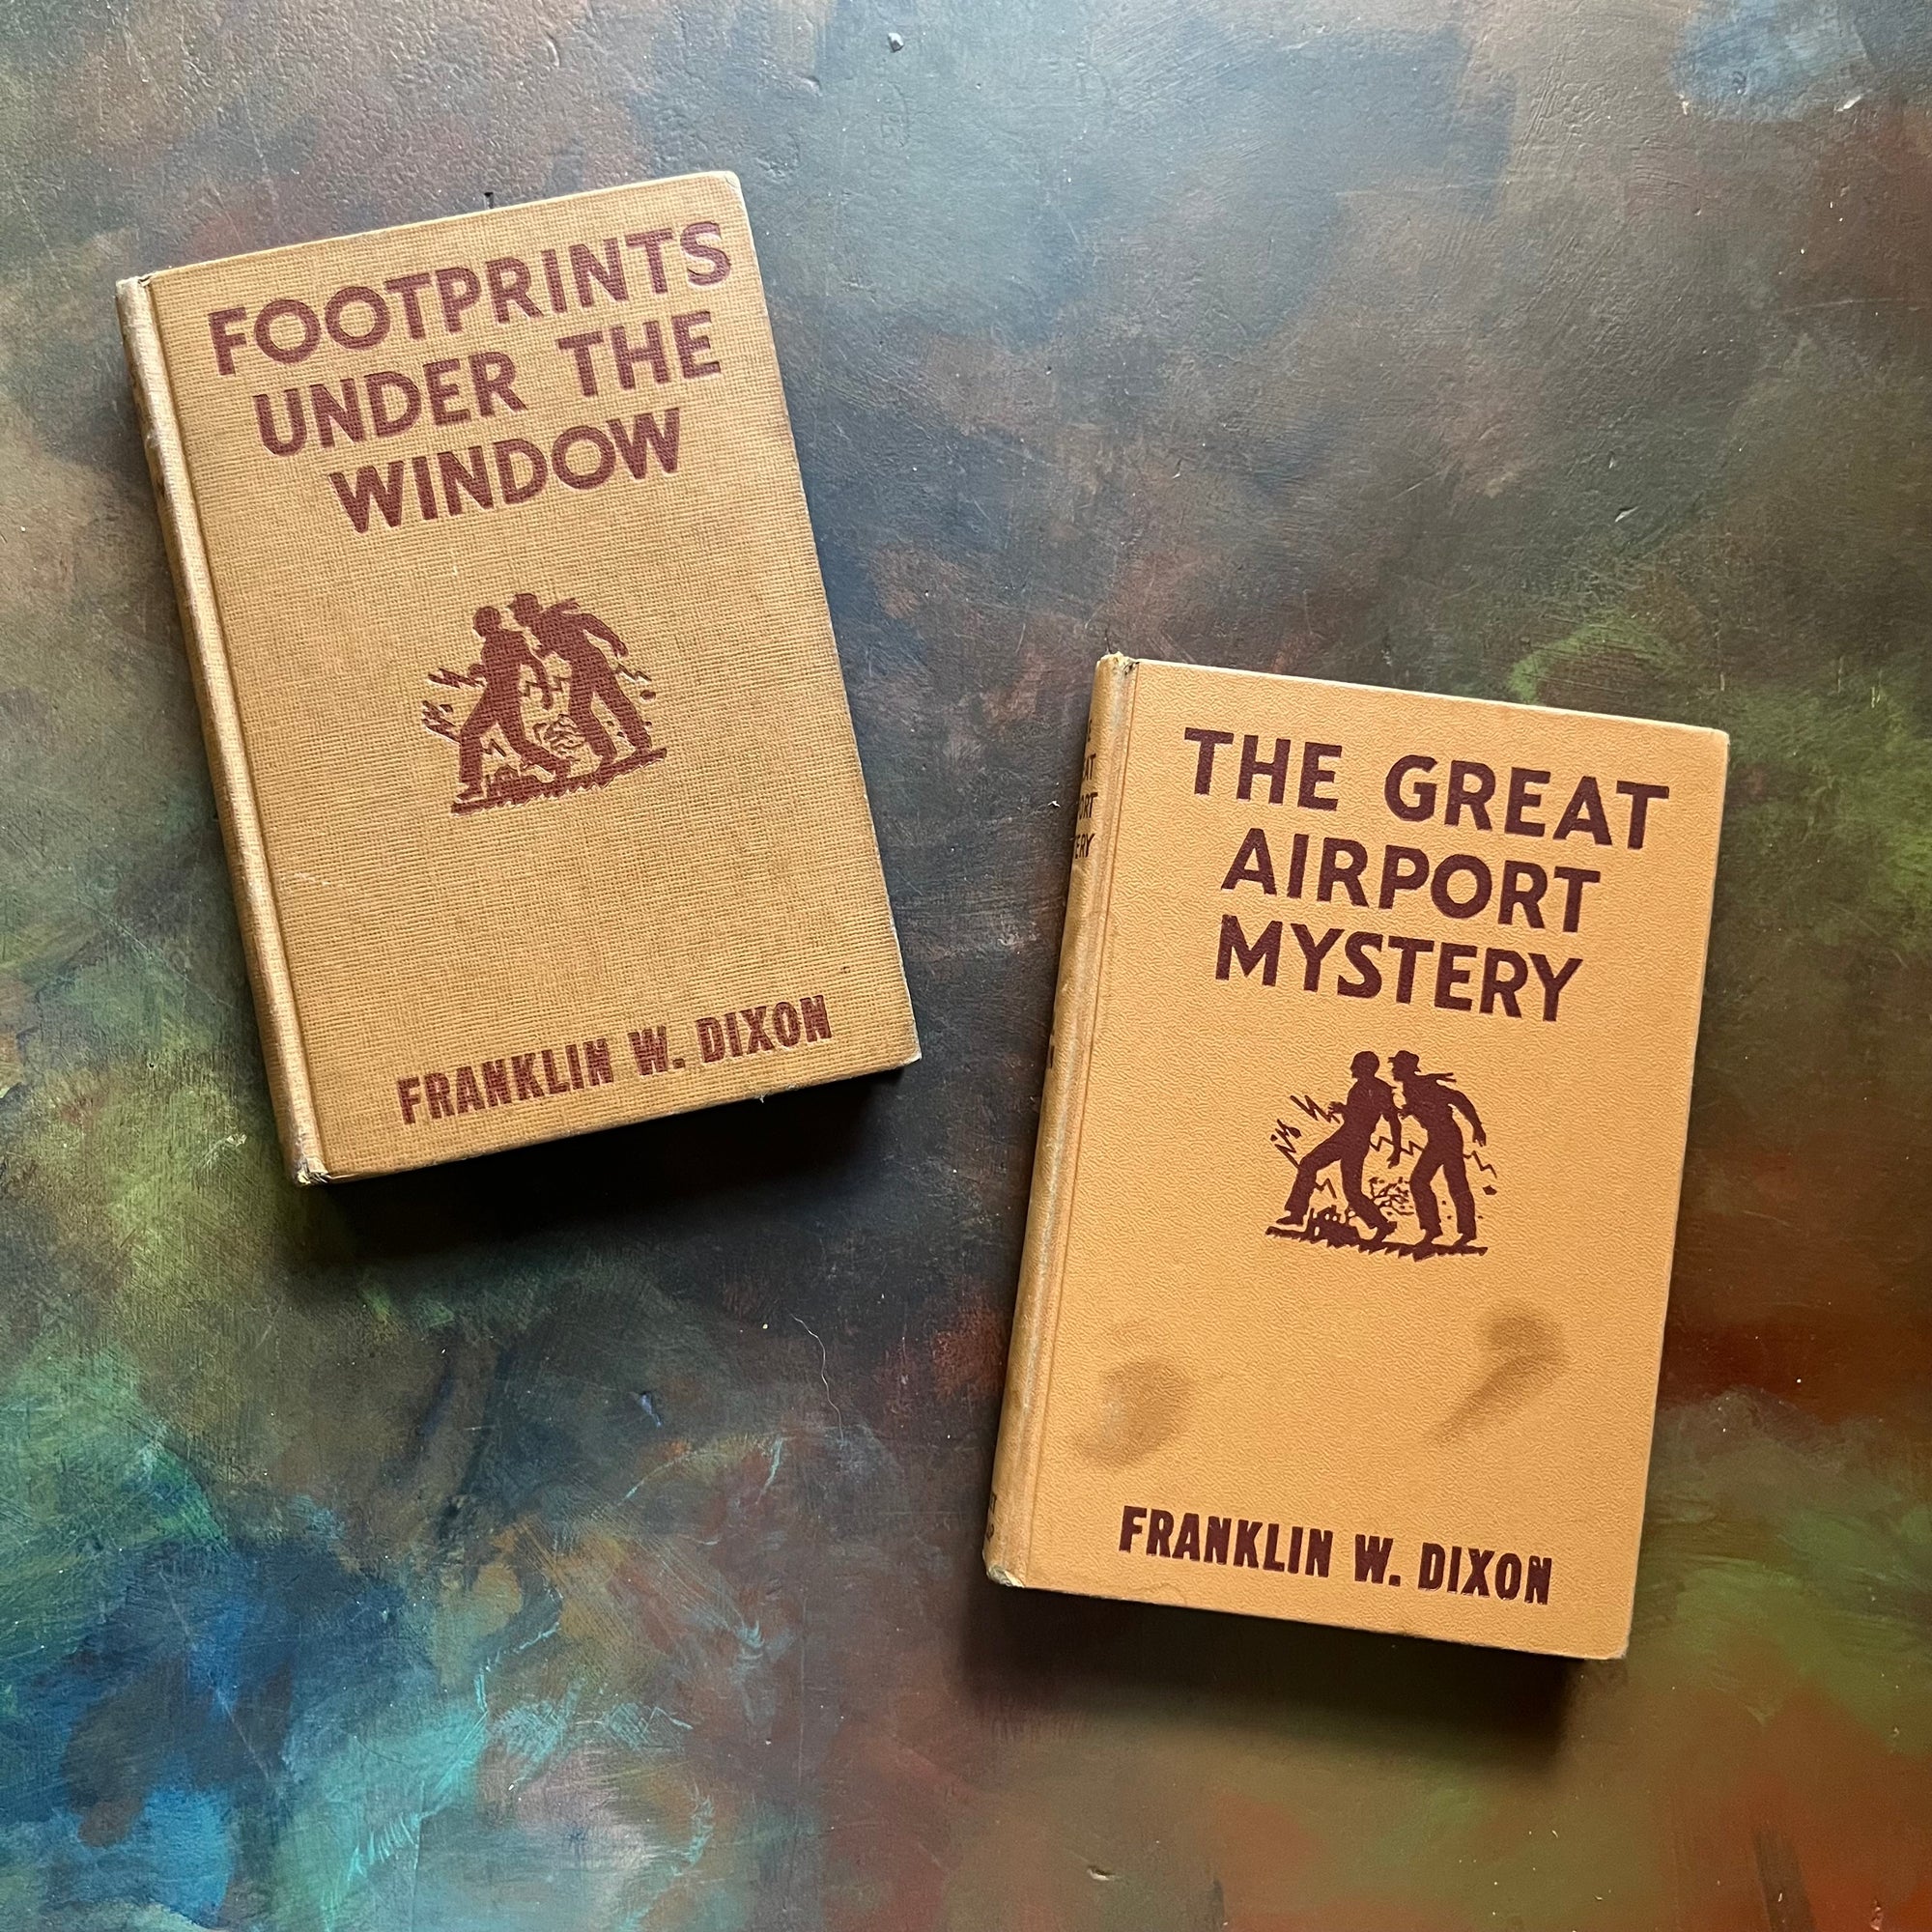 Pair of Hardy Boys Mysteries by Franklin W. Dixon-The Great Airport Mystery #9-Footprints Under the Window #12-chapter books-view of the front covers